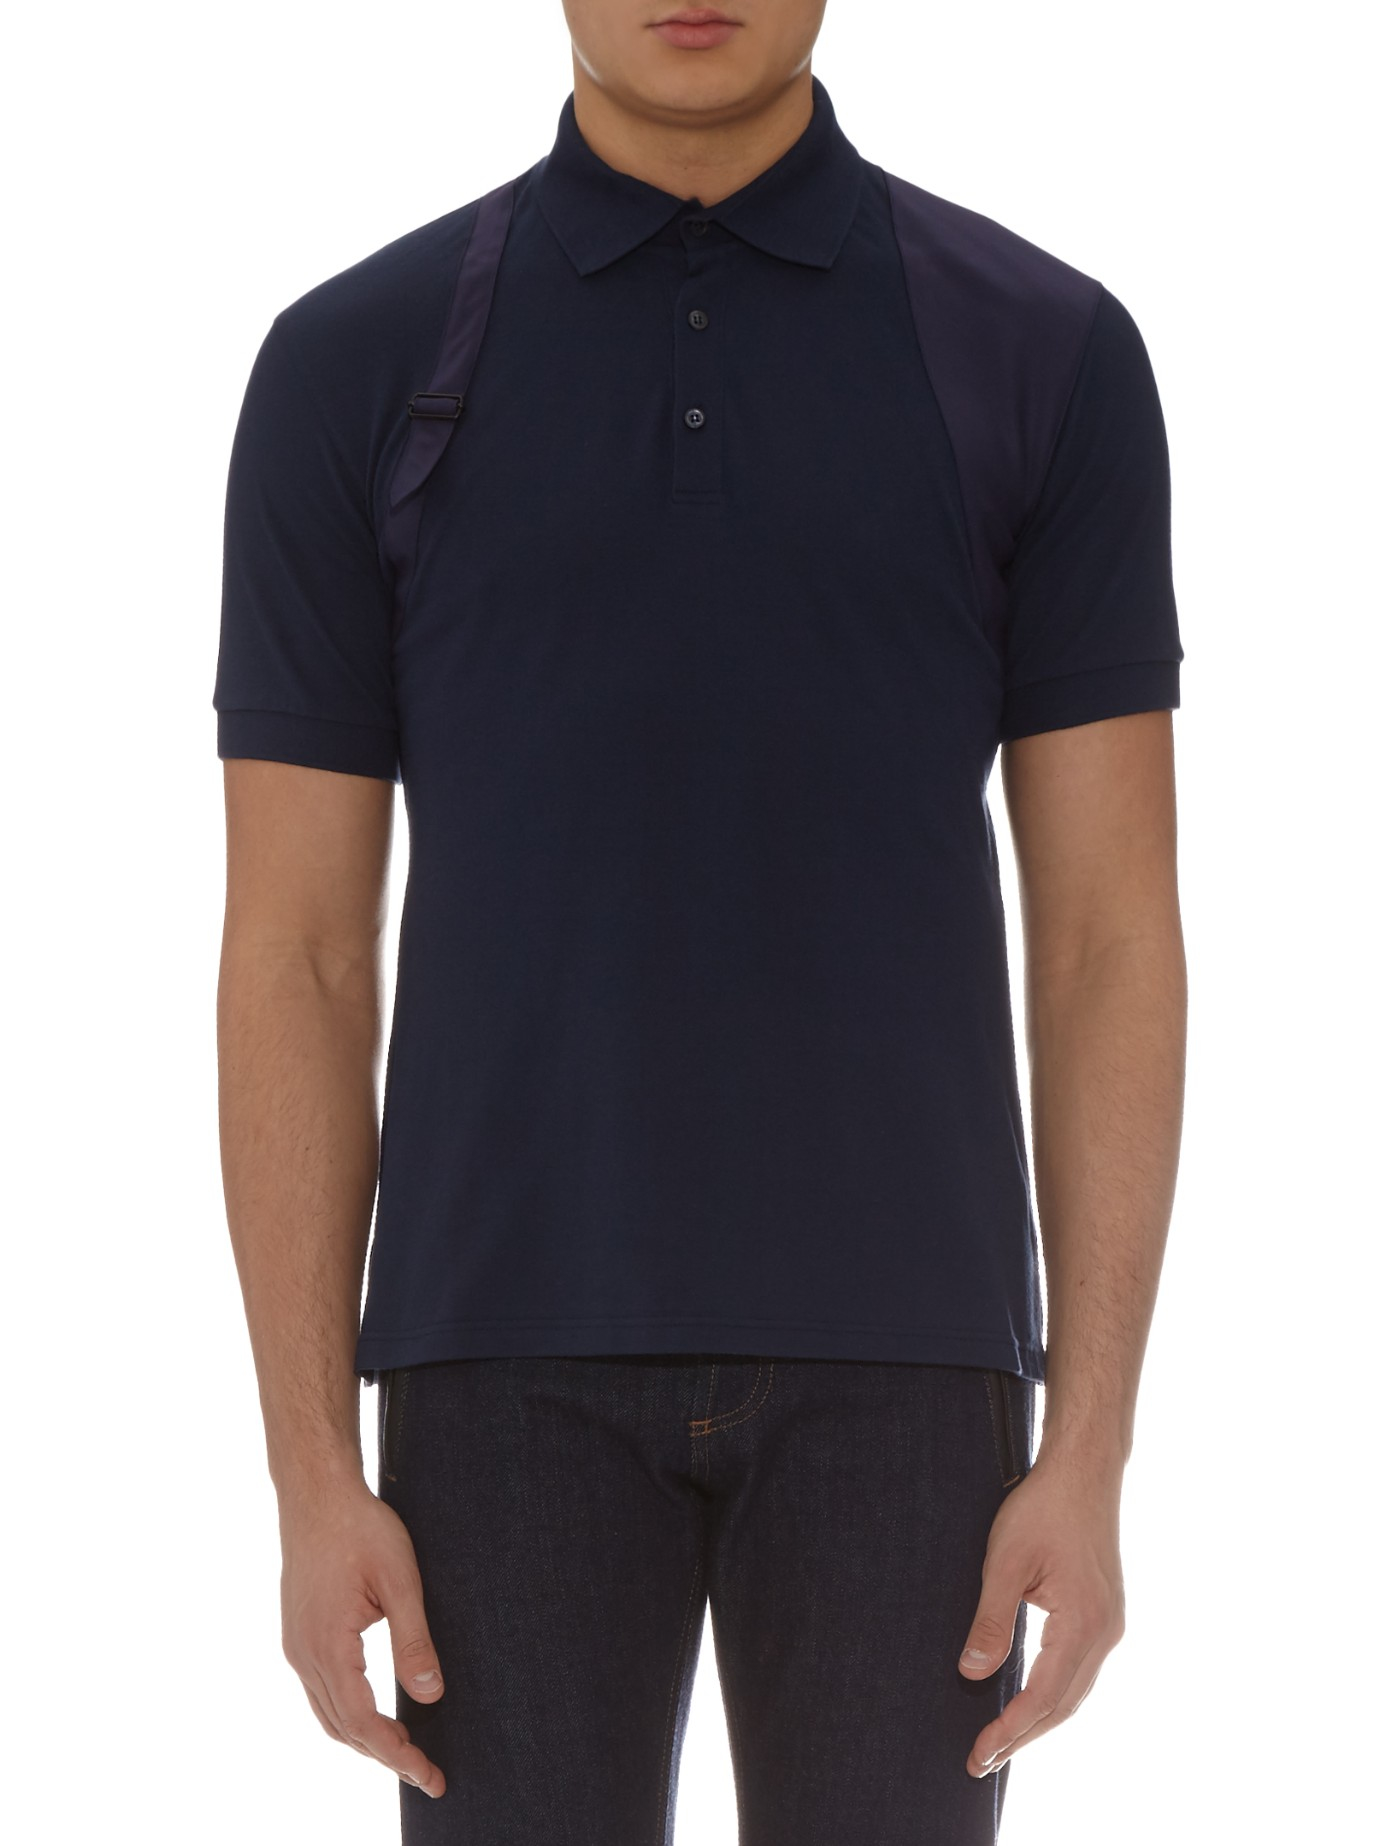 Lyst - Alexander Mcqueen Harness Stand-collar Polo Shirt in Blue for Men